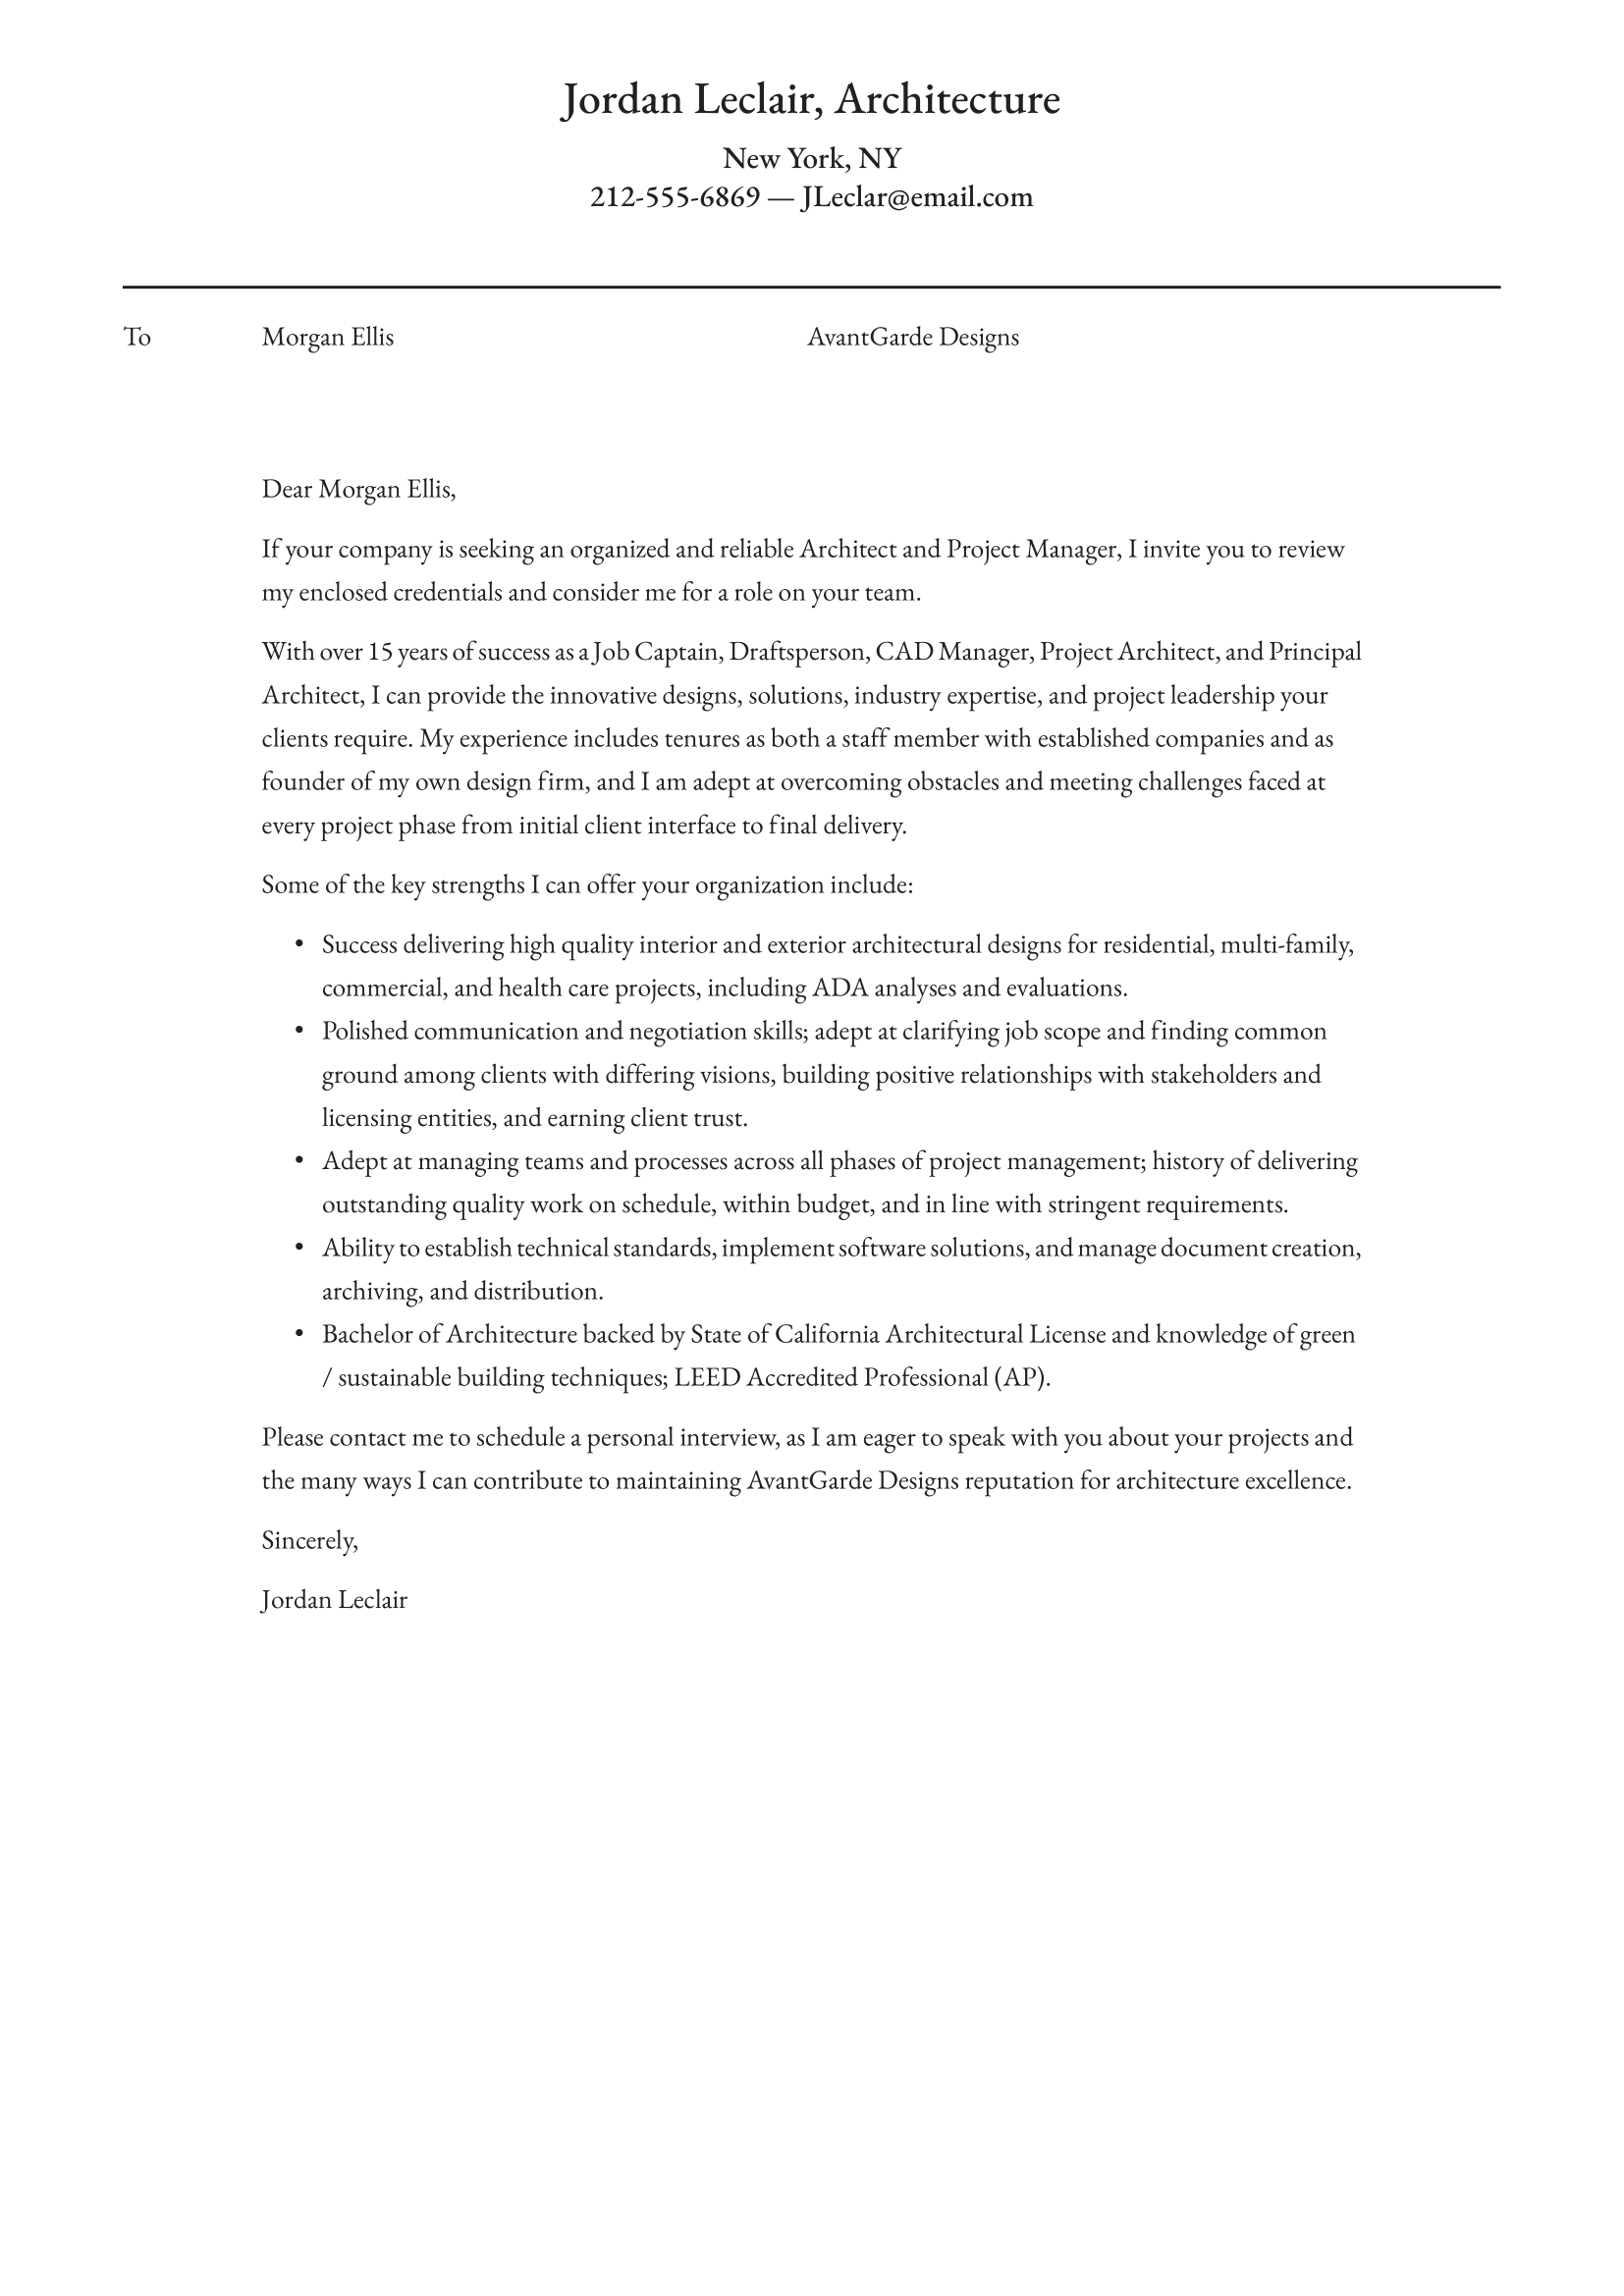 Architecture Cover Letter Example & Writing Guide